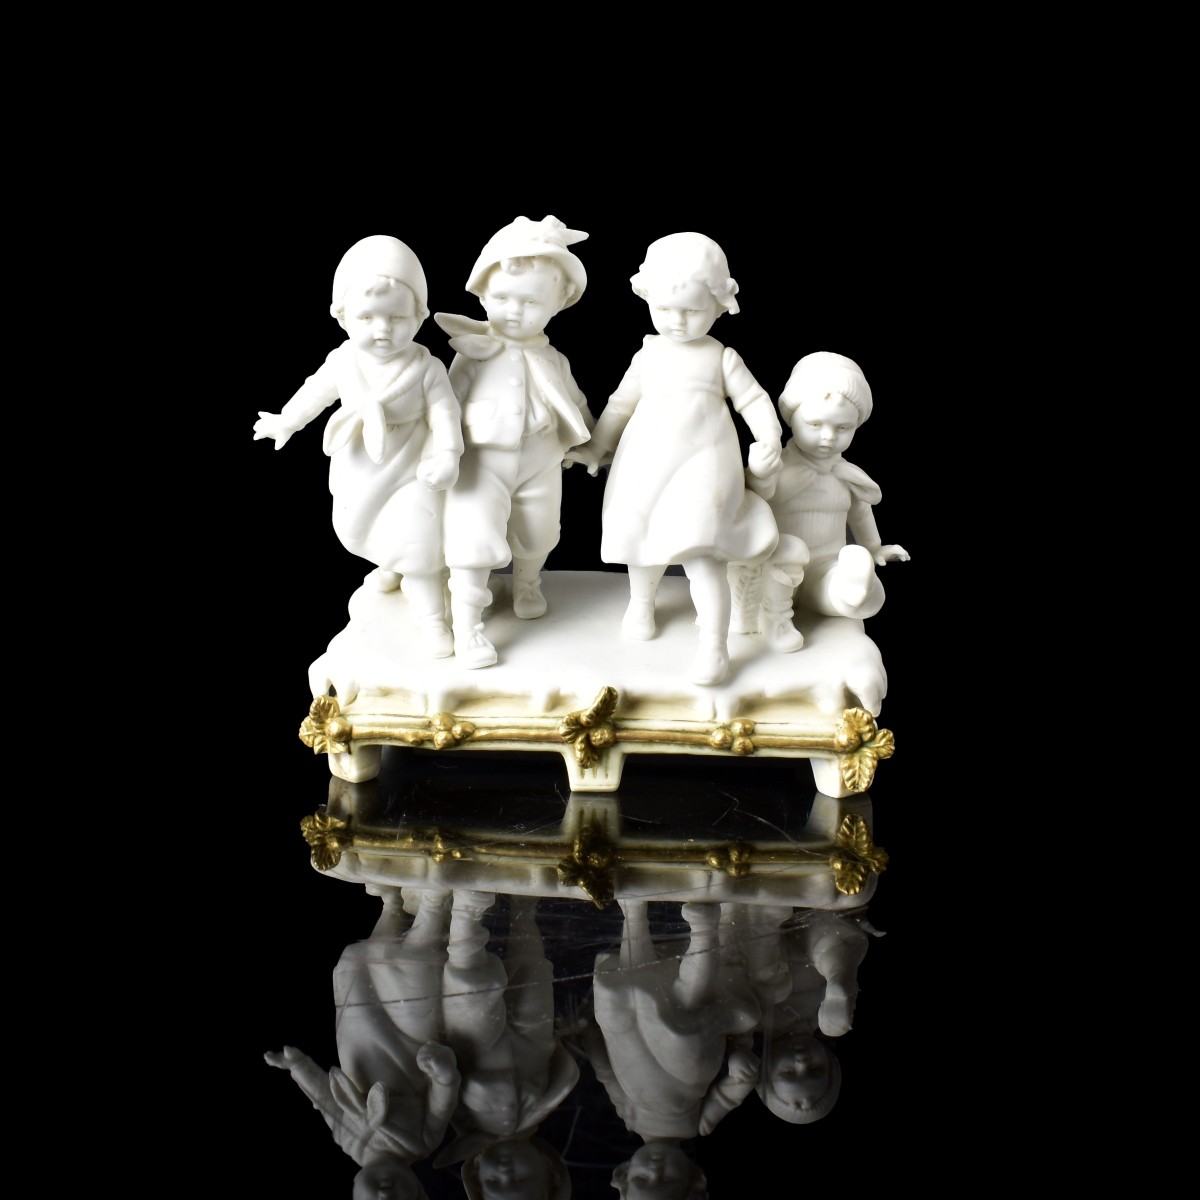 European Bisque "Playing in the Snow" Figurine